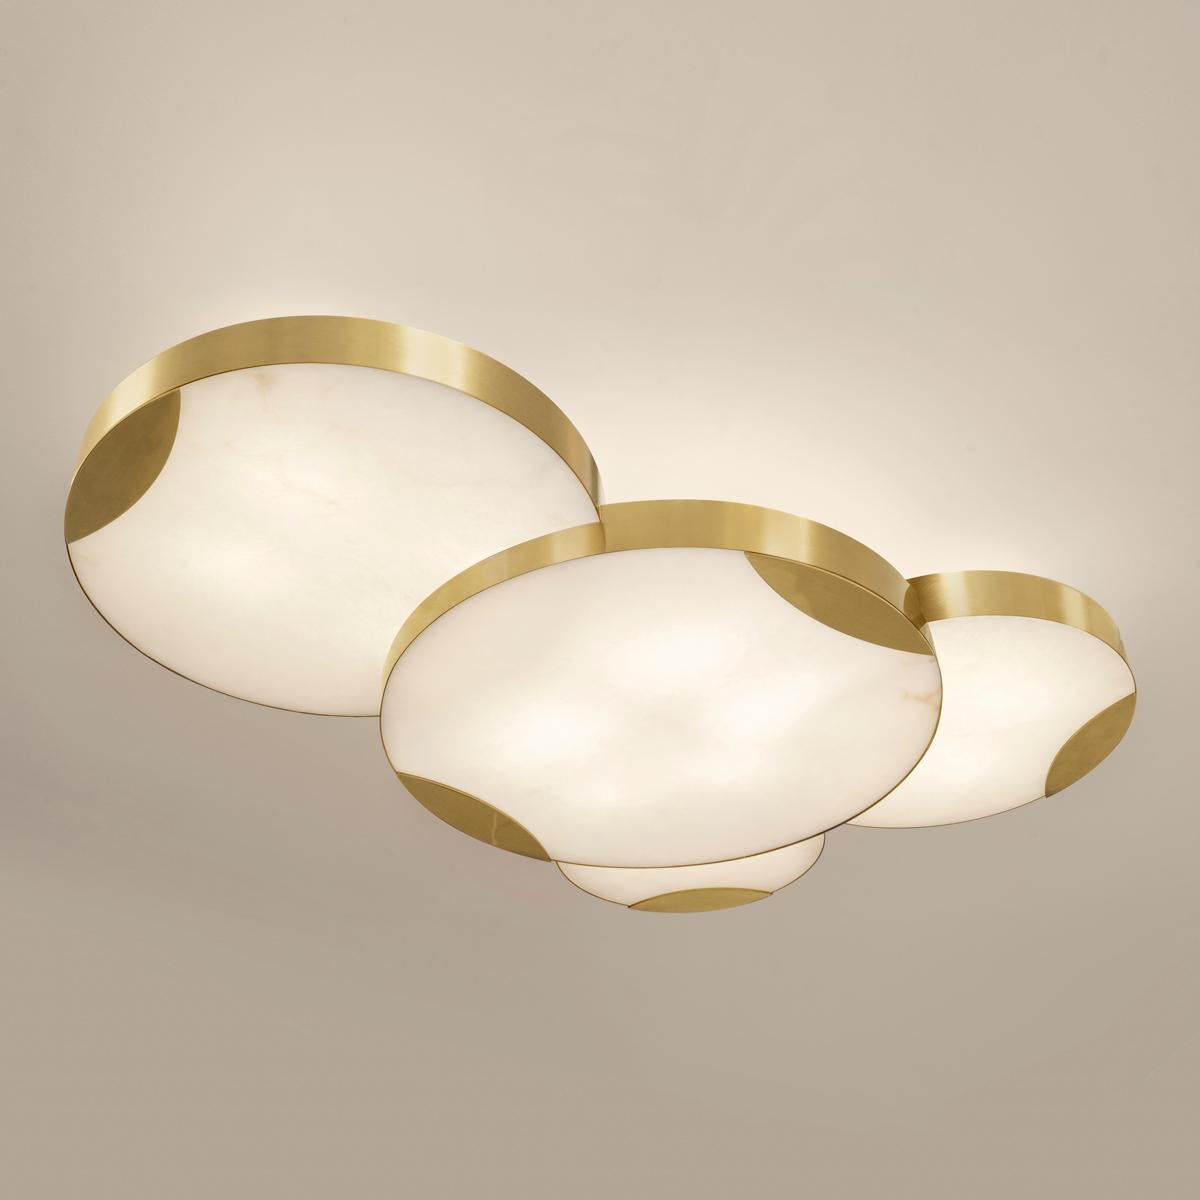 Modern Cloud N.4 Ceiling Light by Gaspare Asaro-Satin Brass Finish For Sale